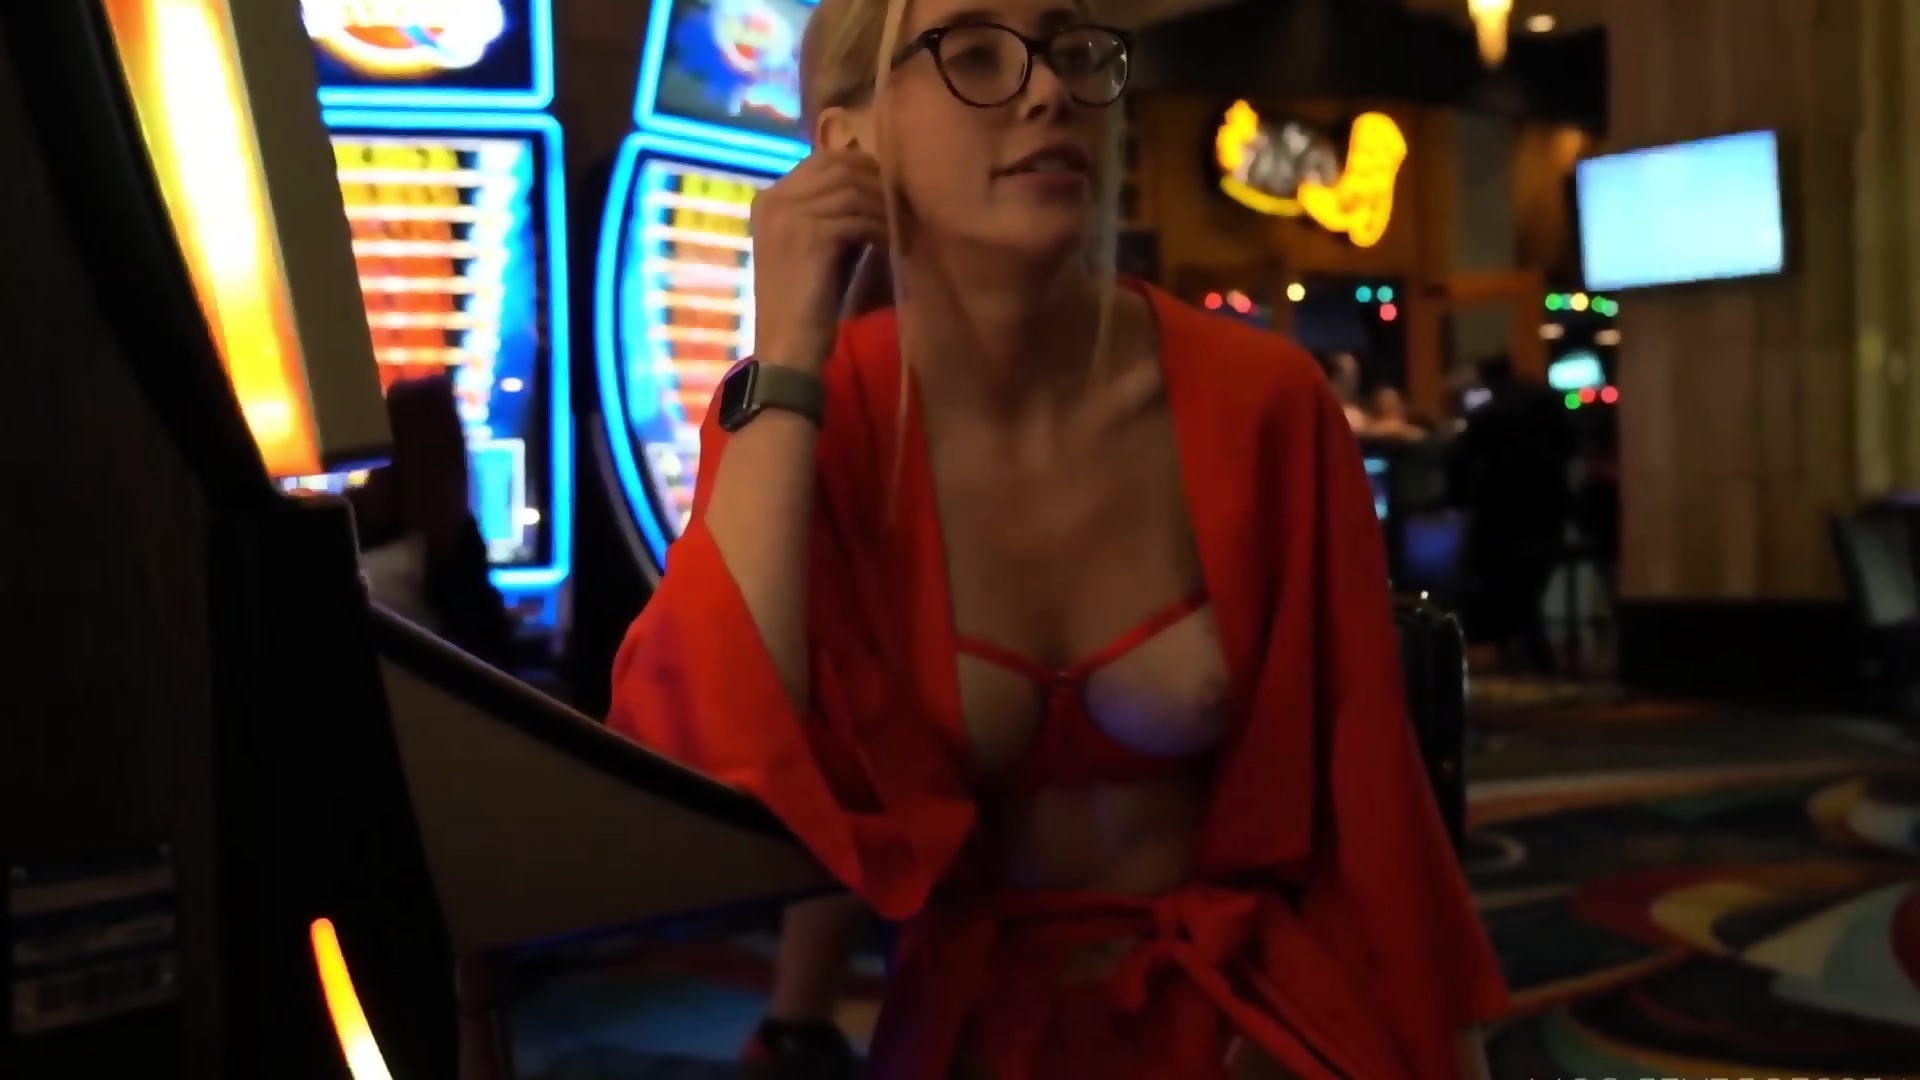 Sexy Amateur Milf Picks Up At The Casino, Fucks Him And Leaves - Dan Damage 